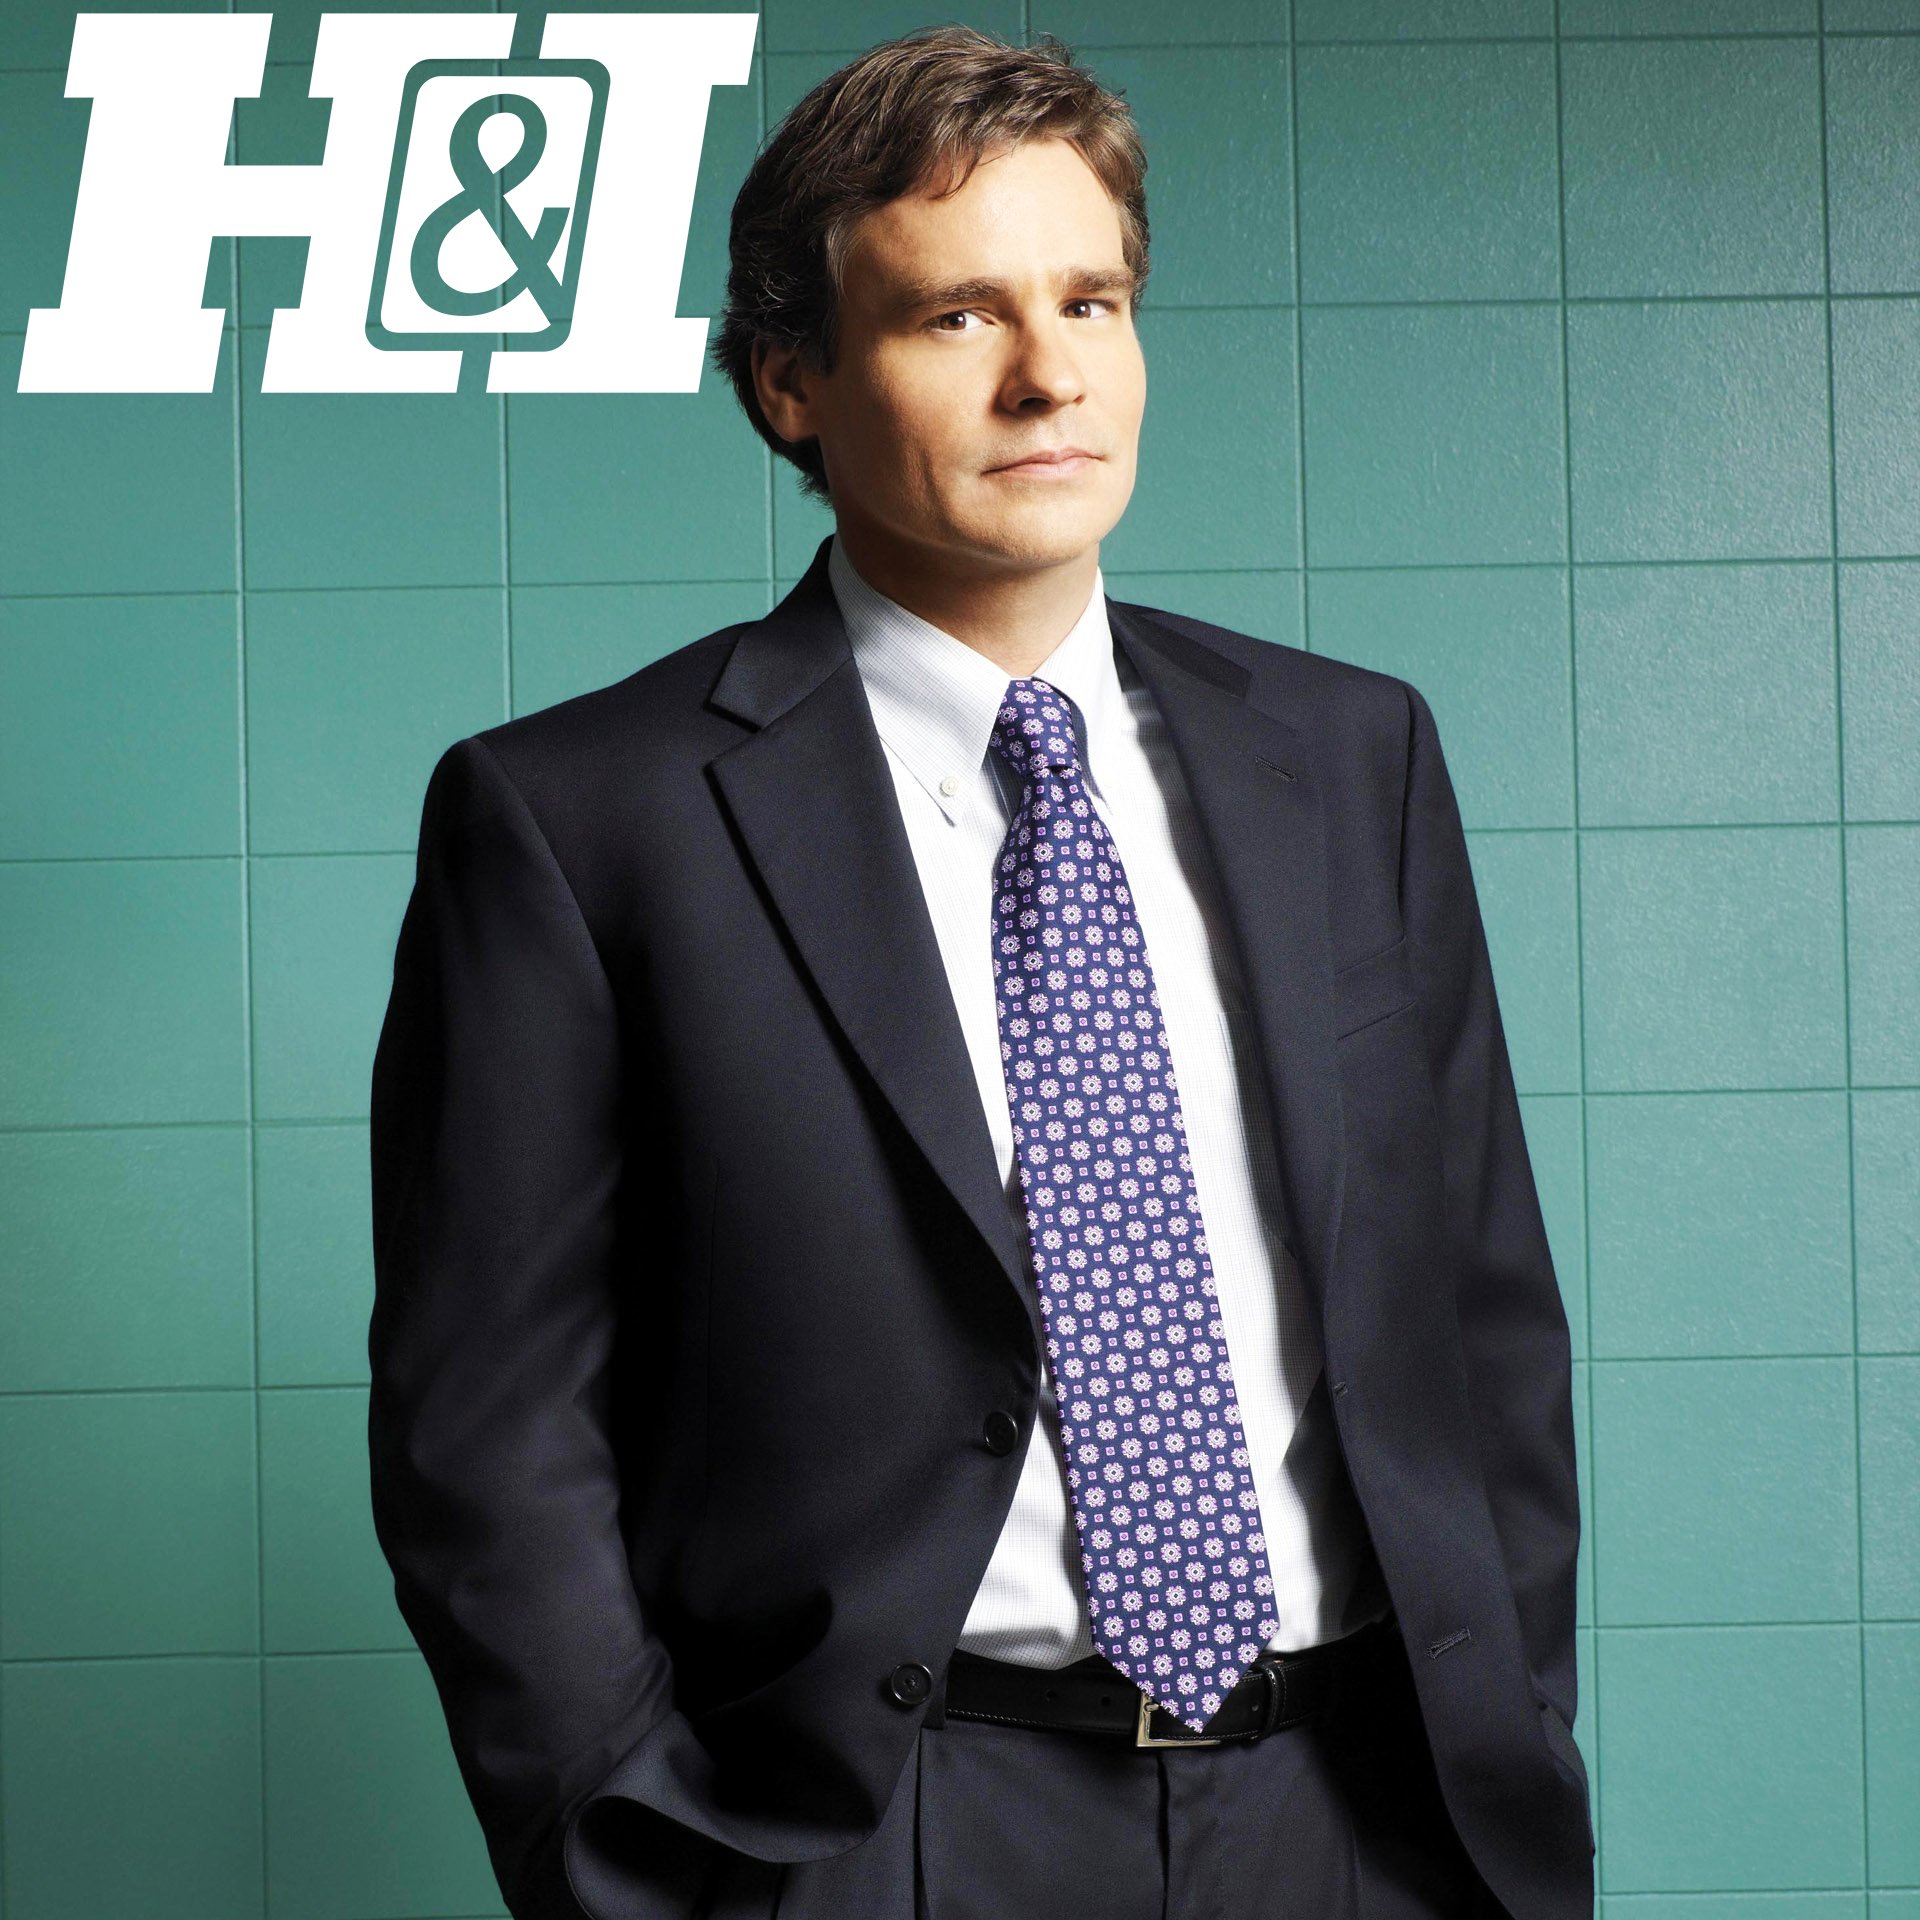 Happy 50th Birthday Robert Sean Leonard! Who is the House to your Winston or vice versa? 